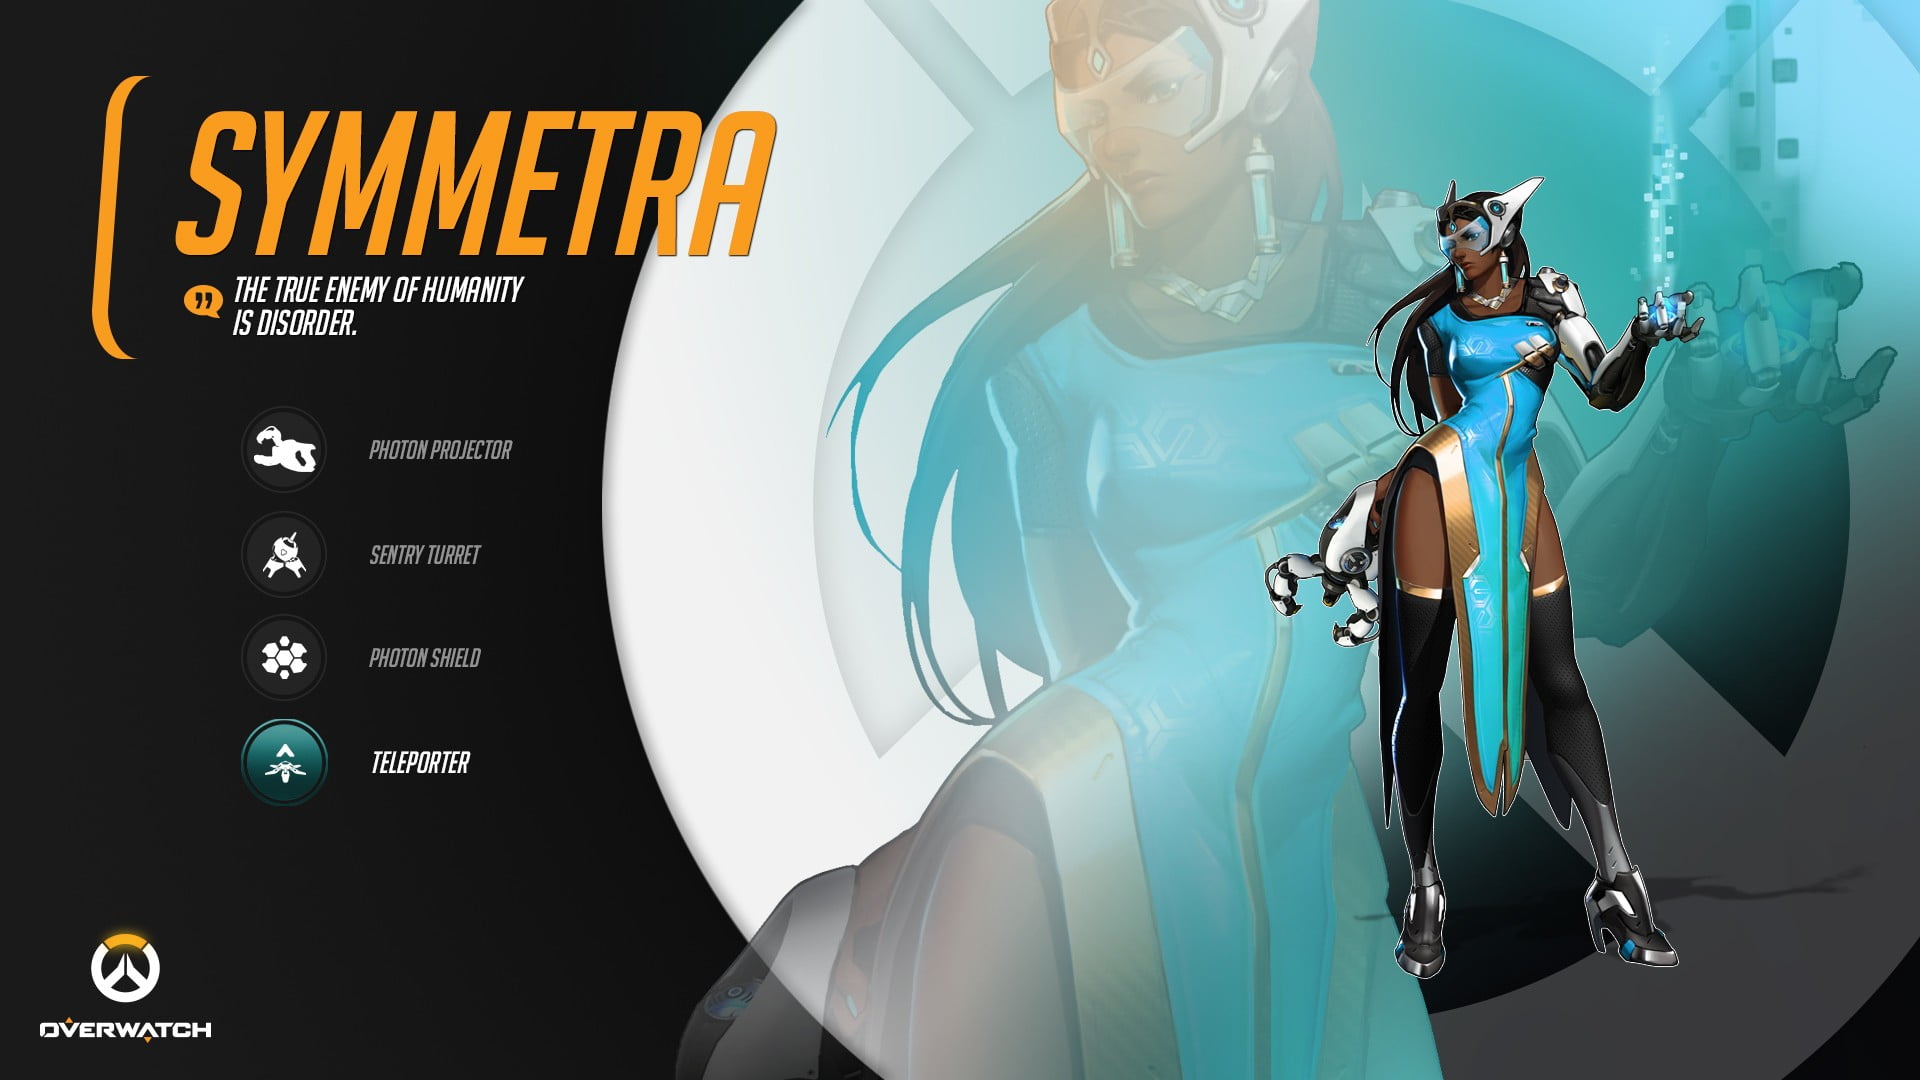 Symmetra game poster, Blizzard Entertainment, Overwatch, video games, hips